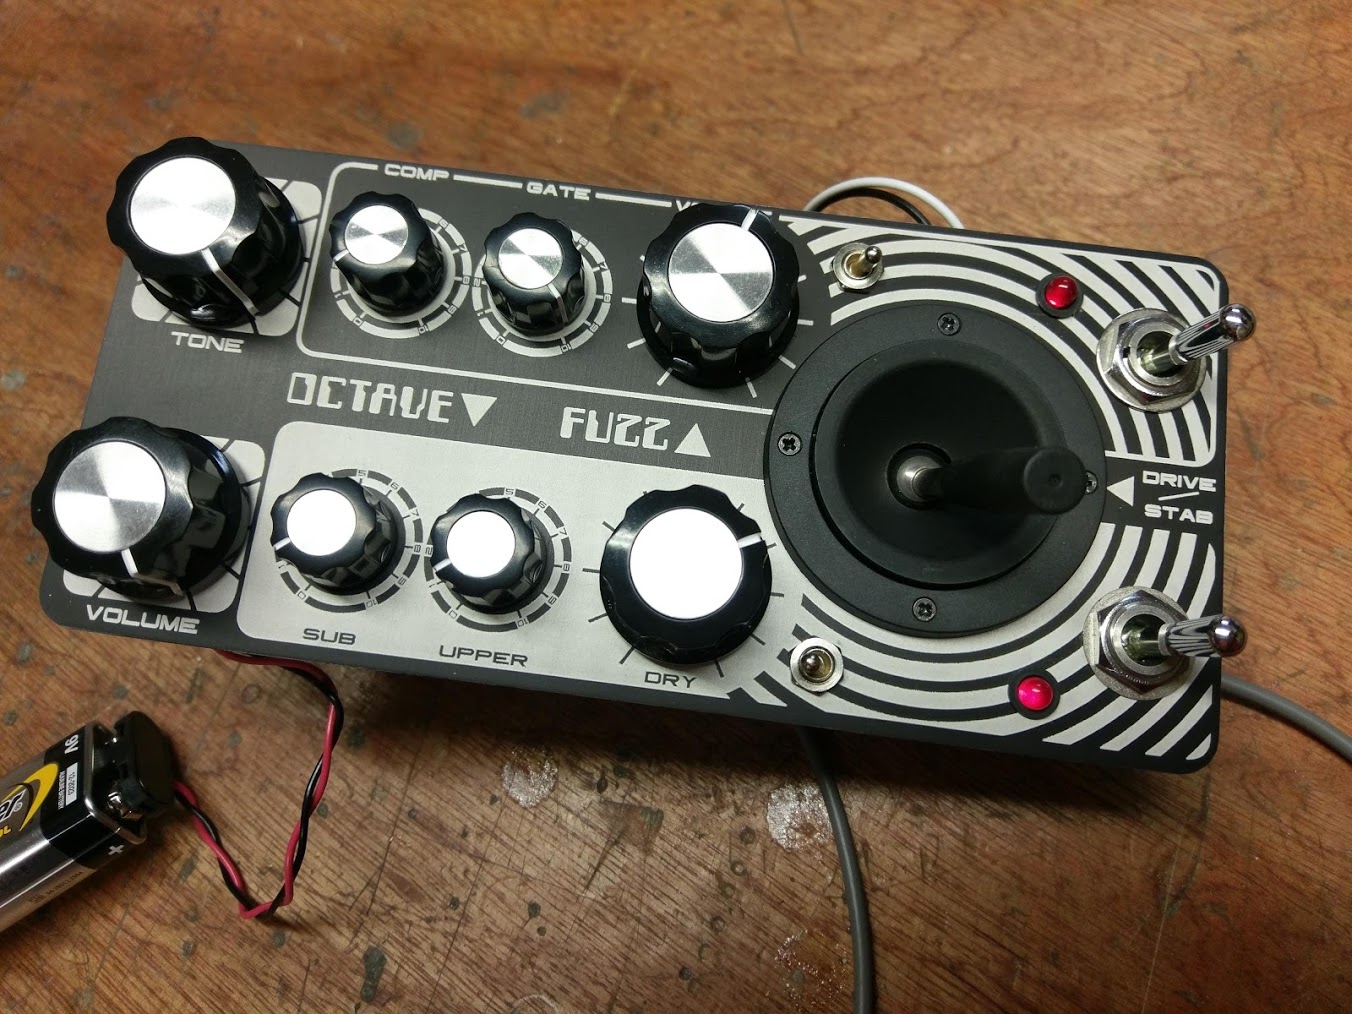 Custom-made effects pedal